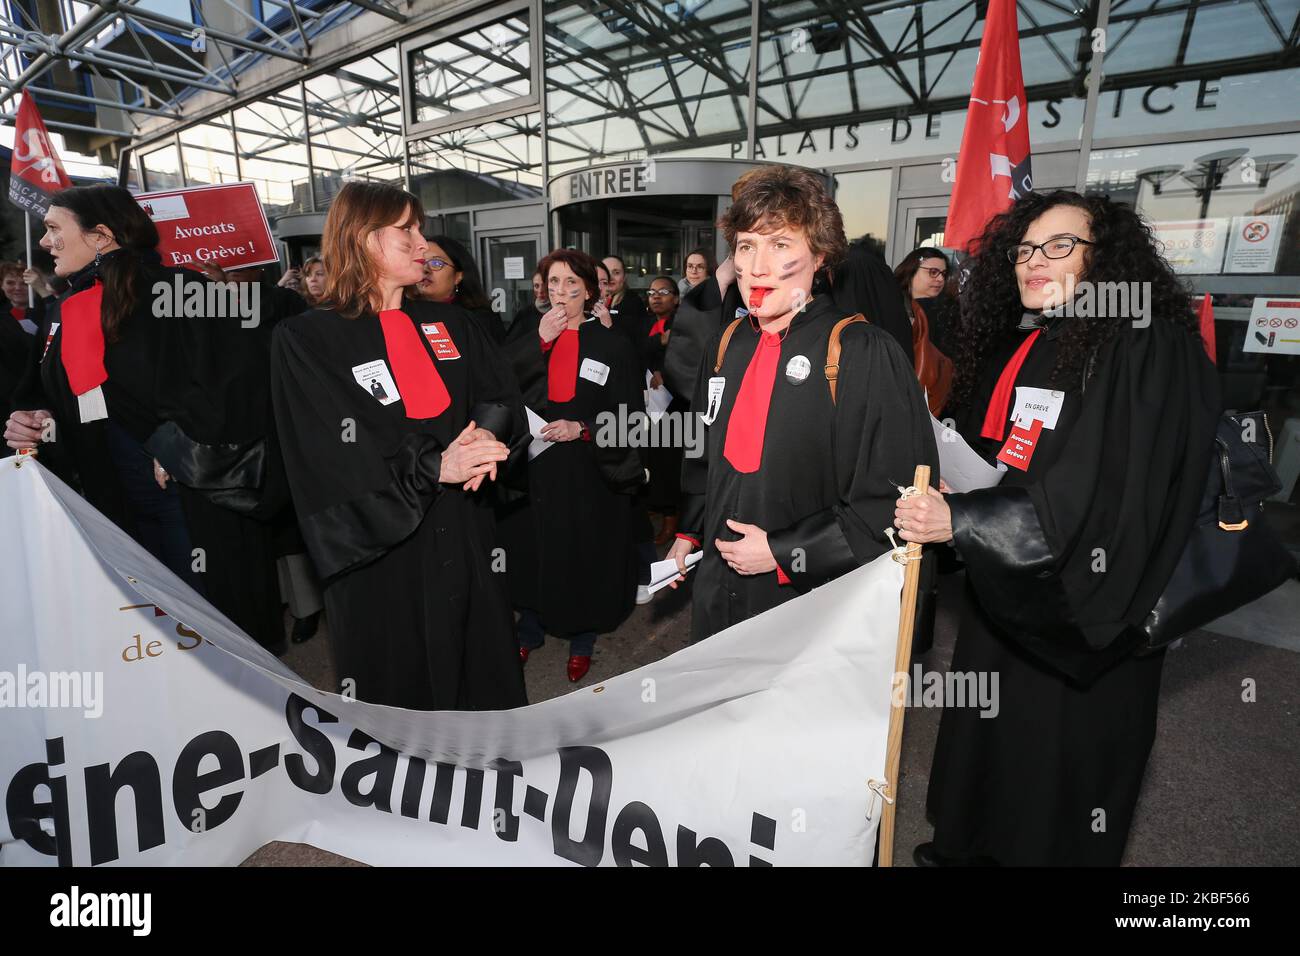 A dozen of lawyers and from the avocature, made an action on the square of the high court of Bobigny, France, the tGI, on 22 January 2020, to protest against the pension reform of the governement. They sang some song, made a rugby Aka, to show their anger. (Photo by Michel Stoupak/NurPhoto) Stock Photo